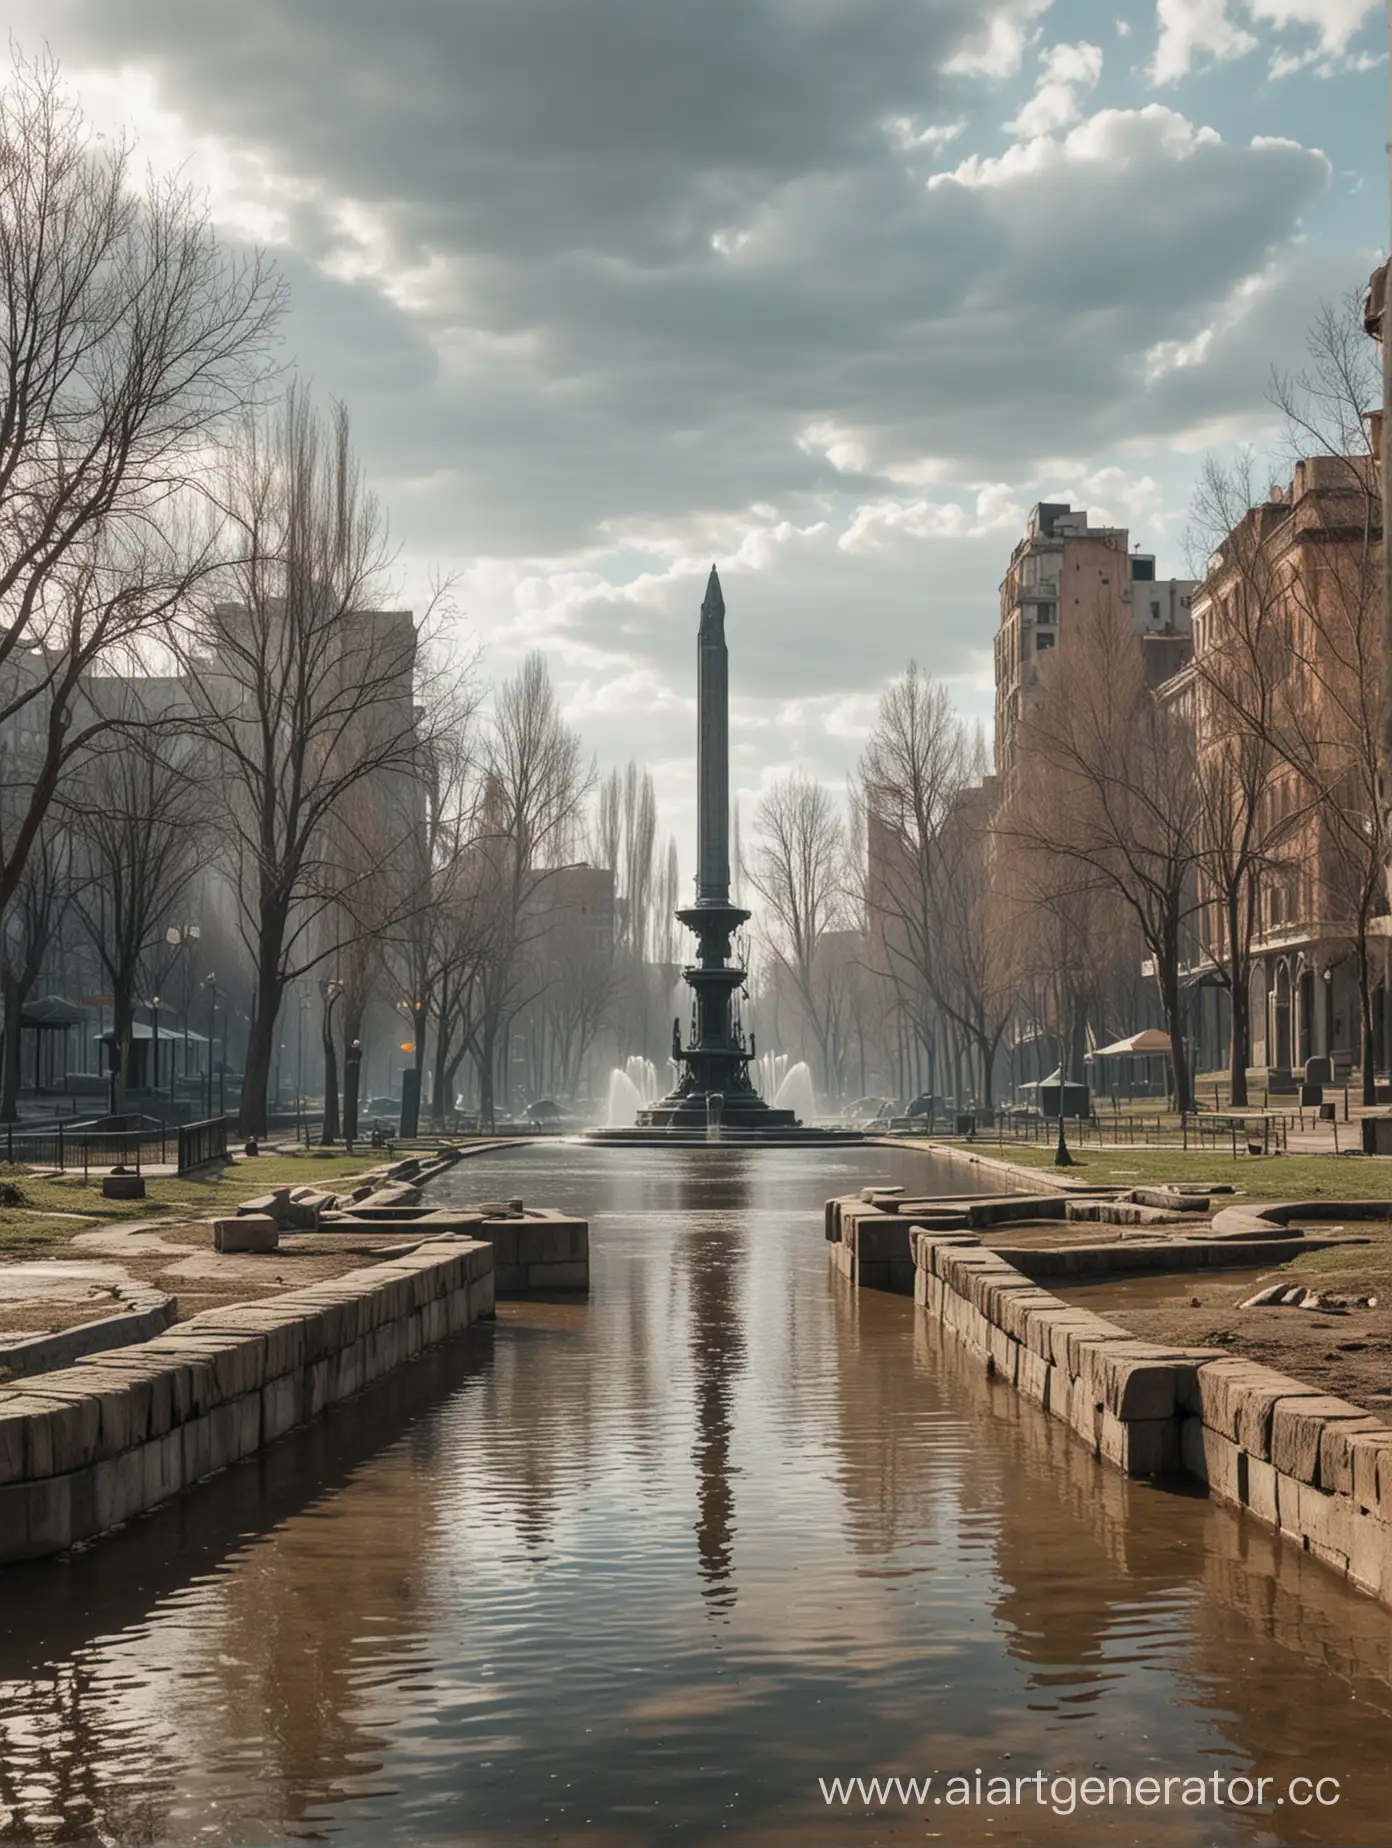 A post-apocalyptic city after an environmental disaster. View of the city park with a monument and a fountain. Low view